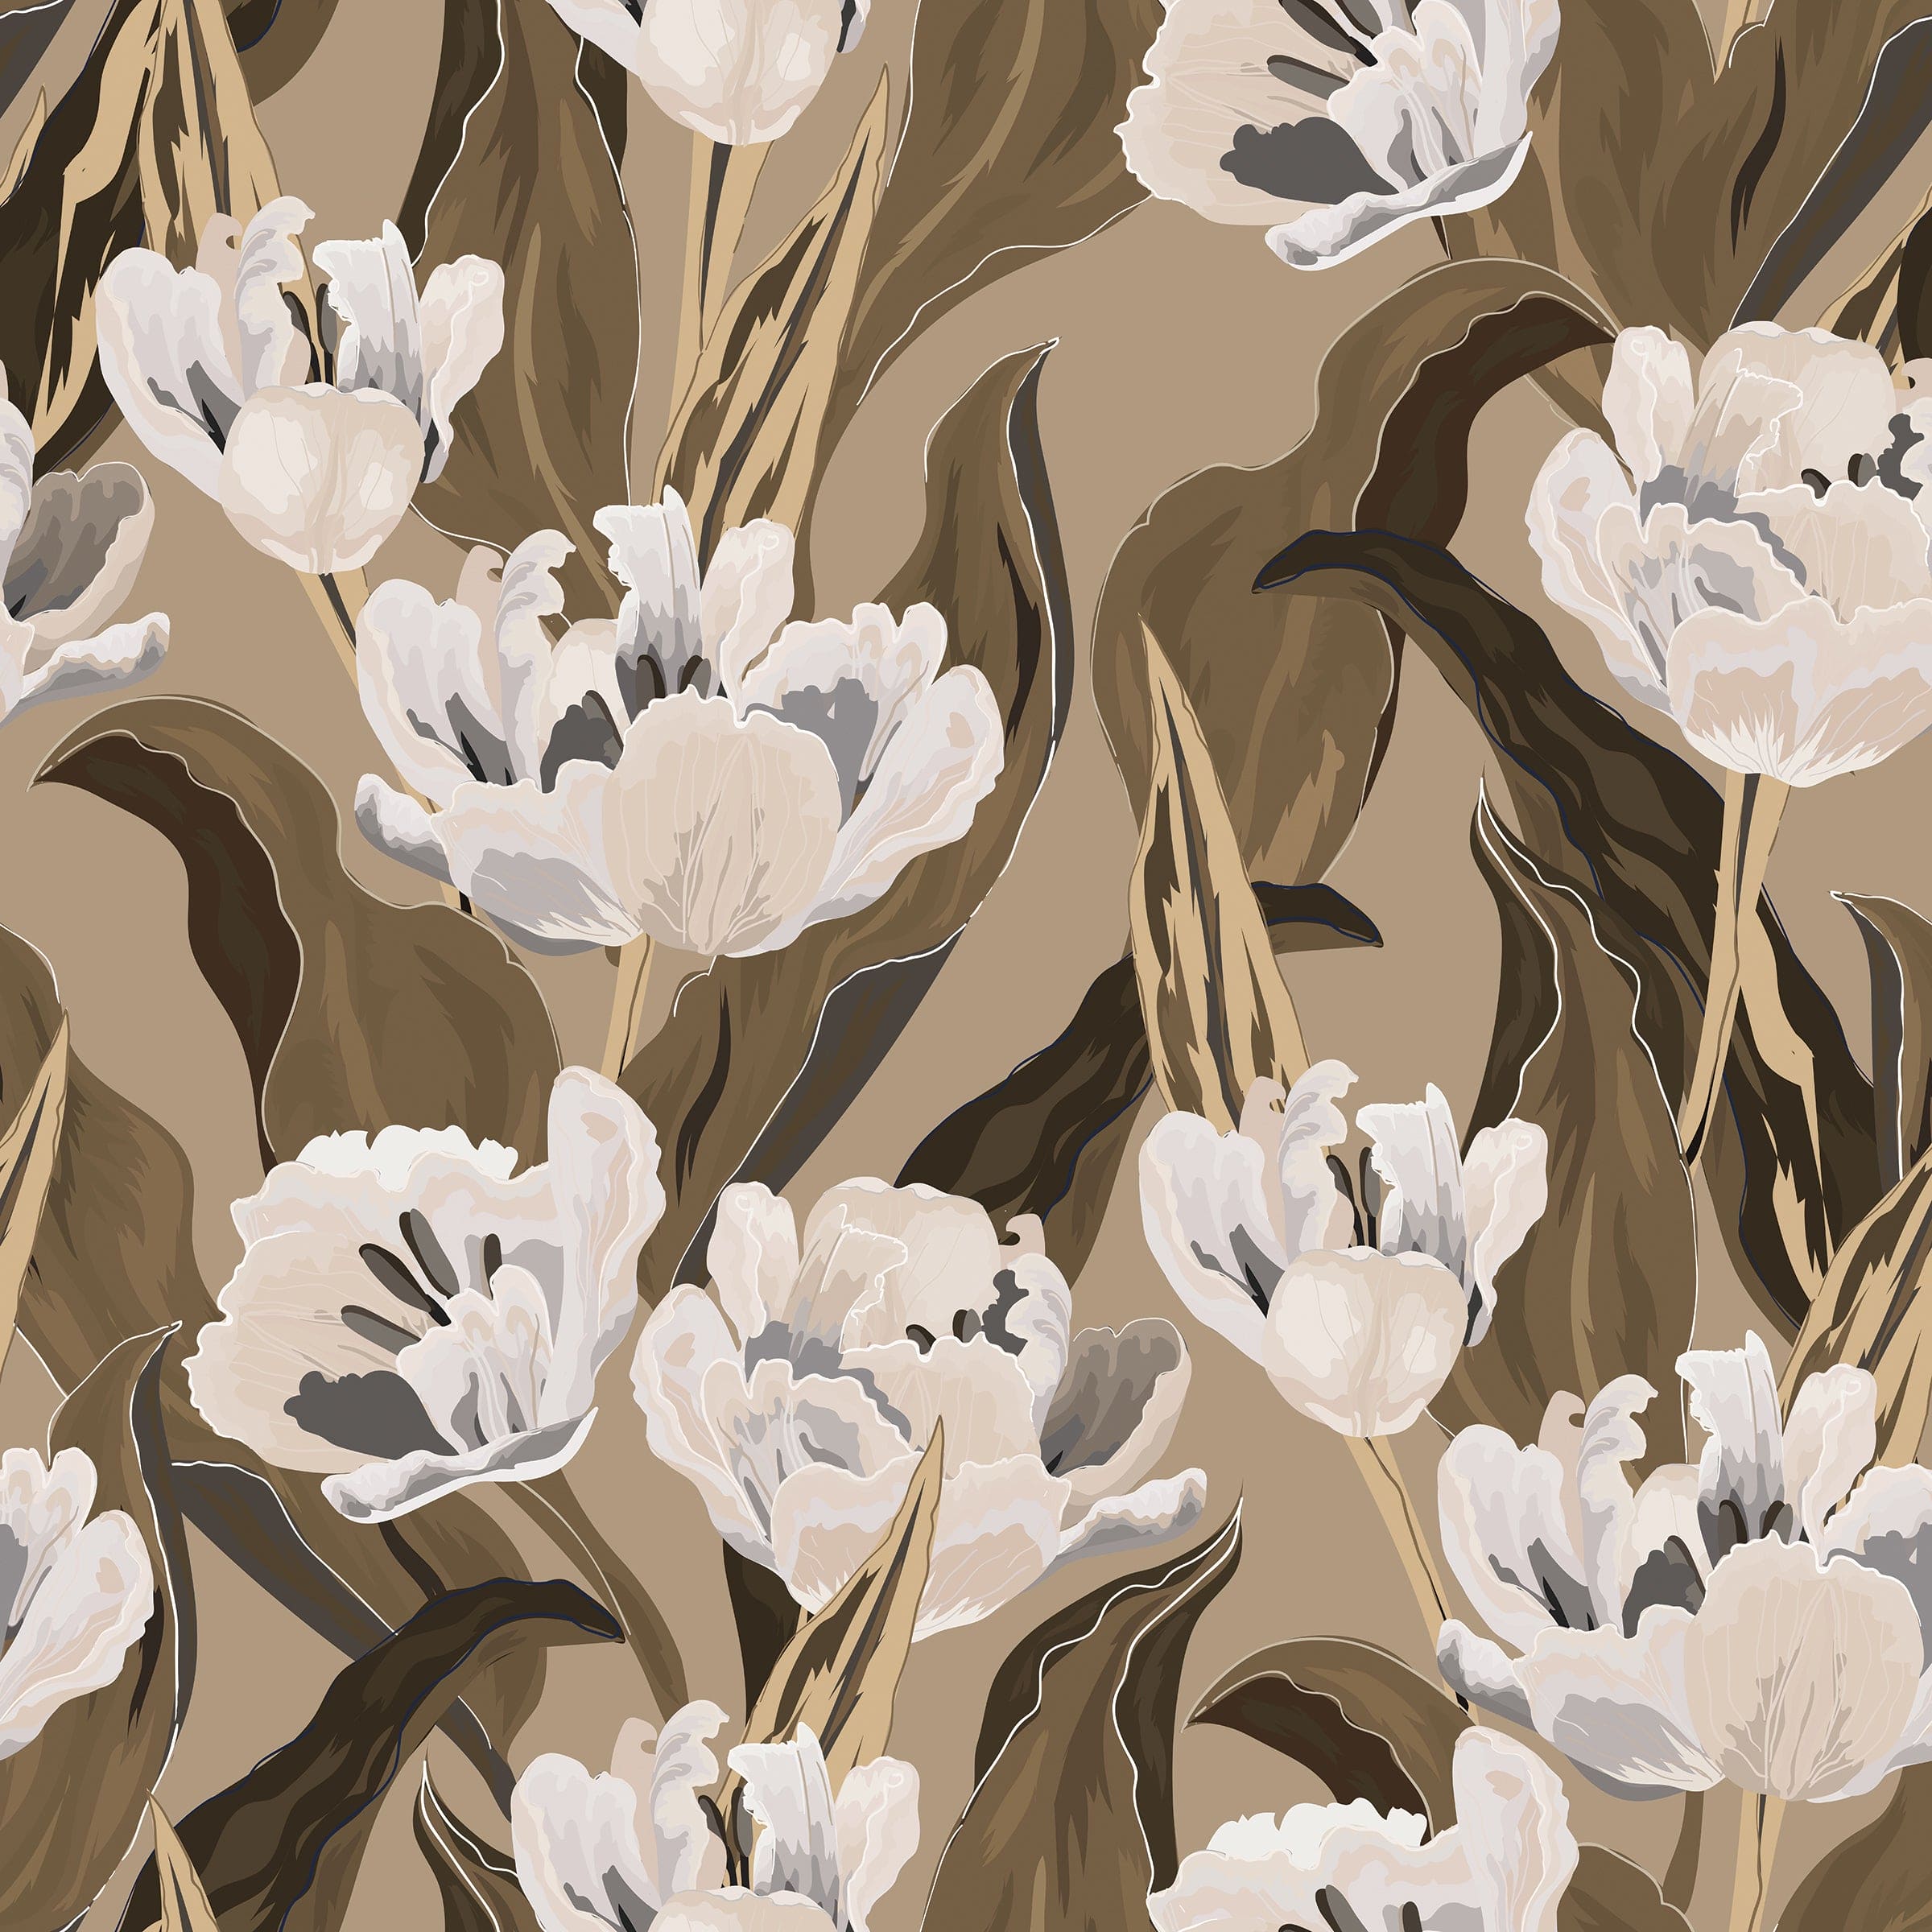 A close-up view of the Blooming Tulips Wallpaper, featuring large, stylized tulips in shades of white and gray, set against a rich taupe background. The tulips are surrounded by flowing dark brown leaves and stems, creating a dynamic and naturalistic floral pattern